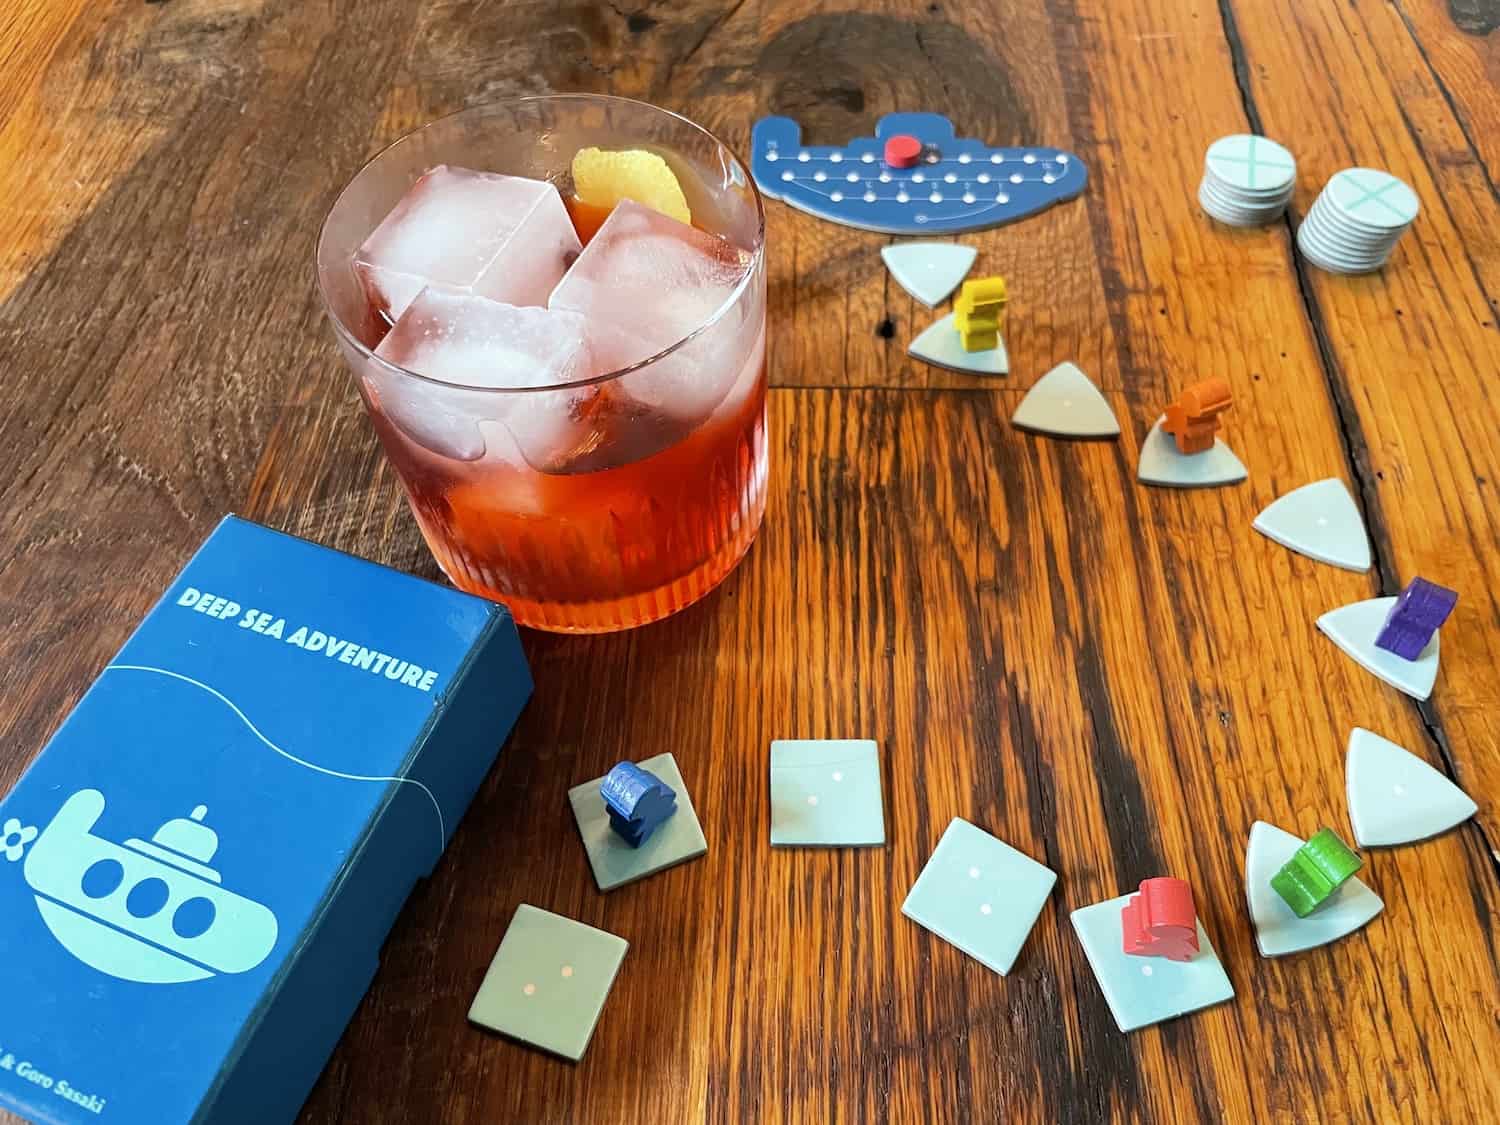 the board game Deep Sea Adventure with a Boulevardier cocktail